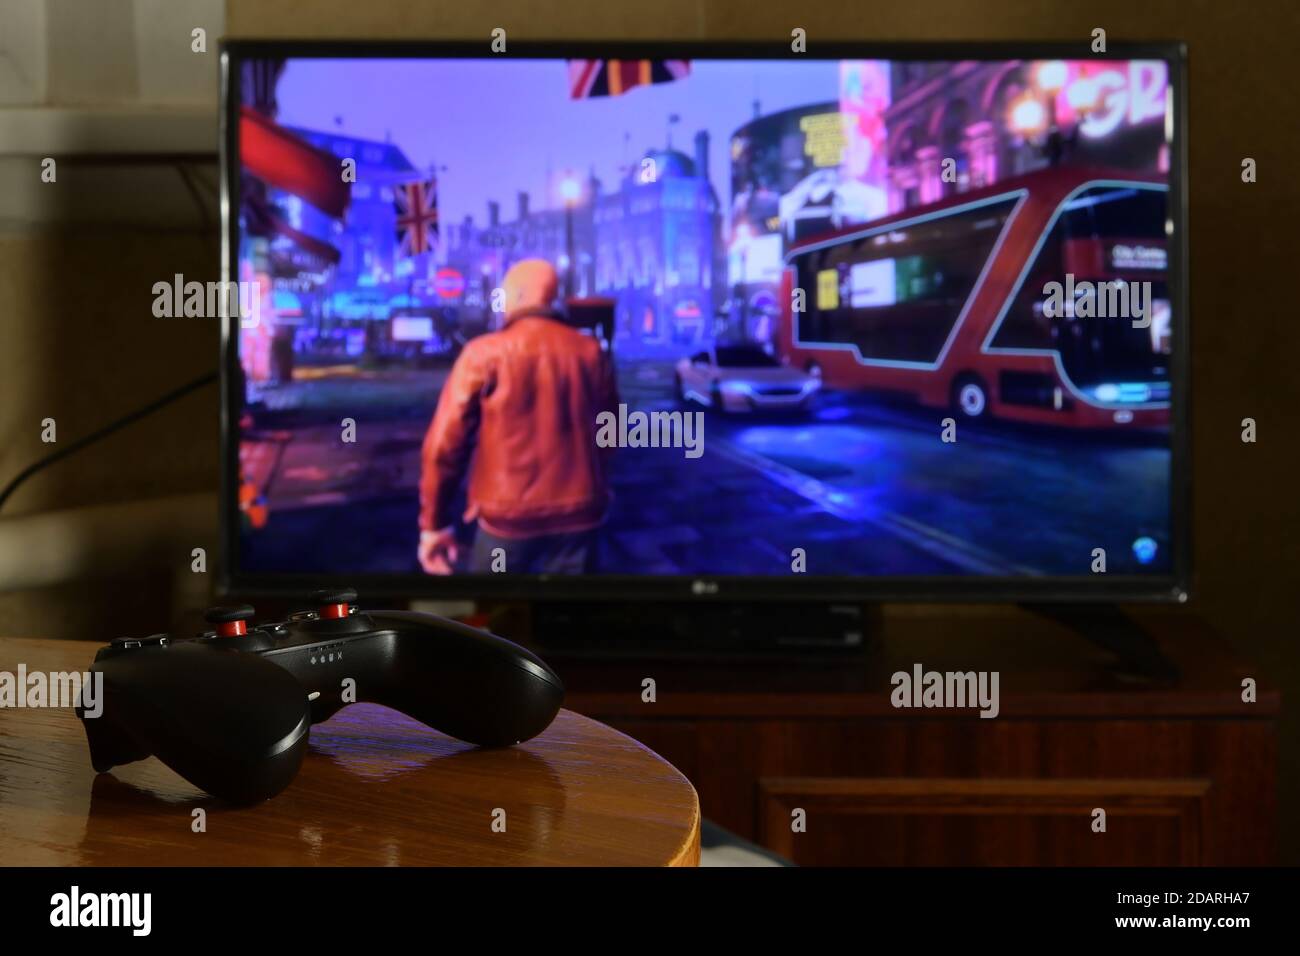 KHARKOV, UKRAINE - NOVEMBER 12, 2020: Video game controller Gamesir g3s on  table with Watch Dogs Legion game on big display Stock Photo - Alamy